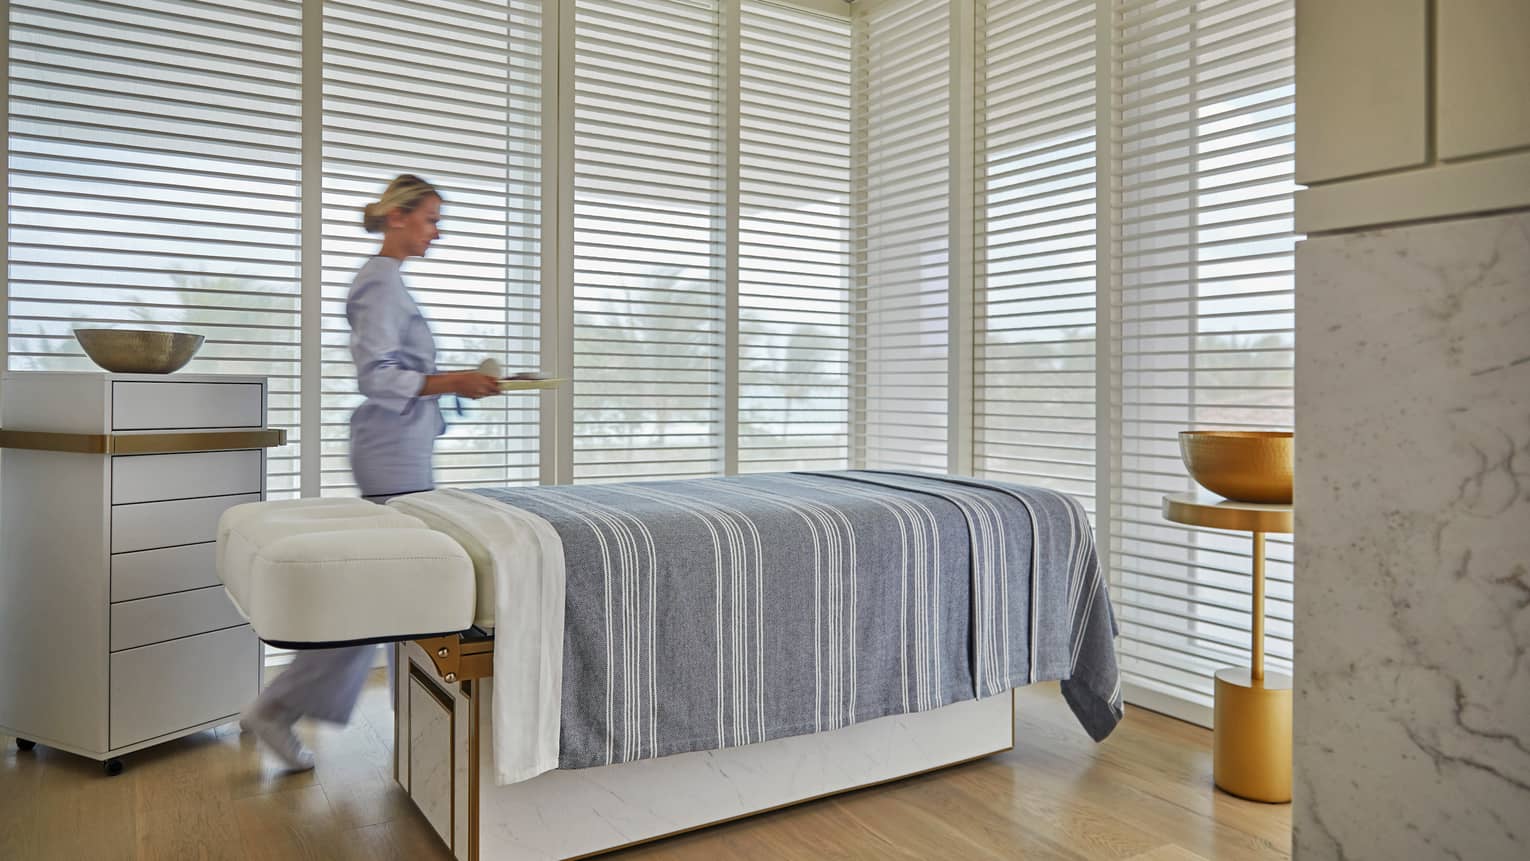 Spa attendant carries tray in treatment room, wall-to-ceiling windows, massage table covered with striped sheet 